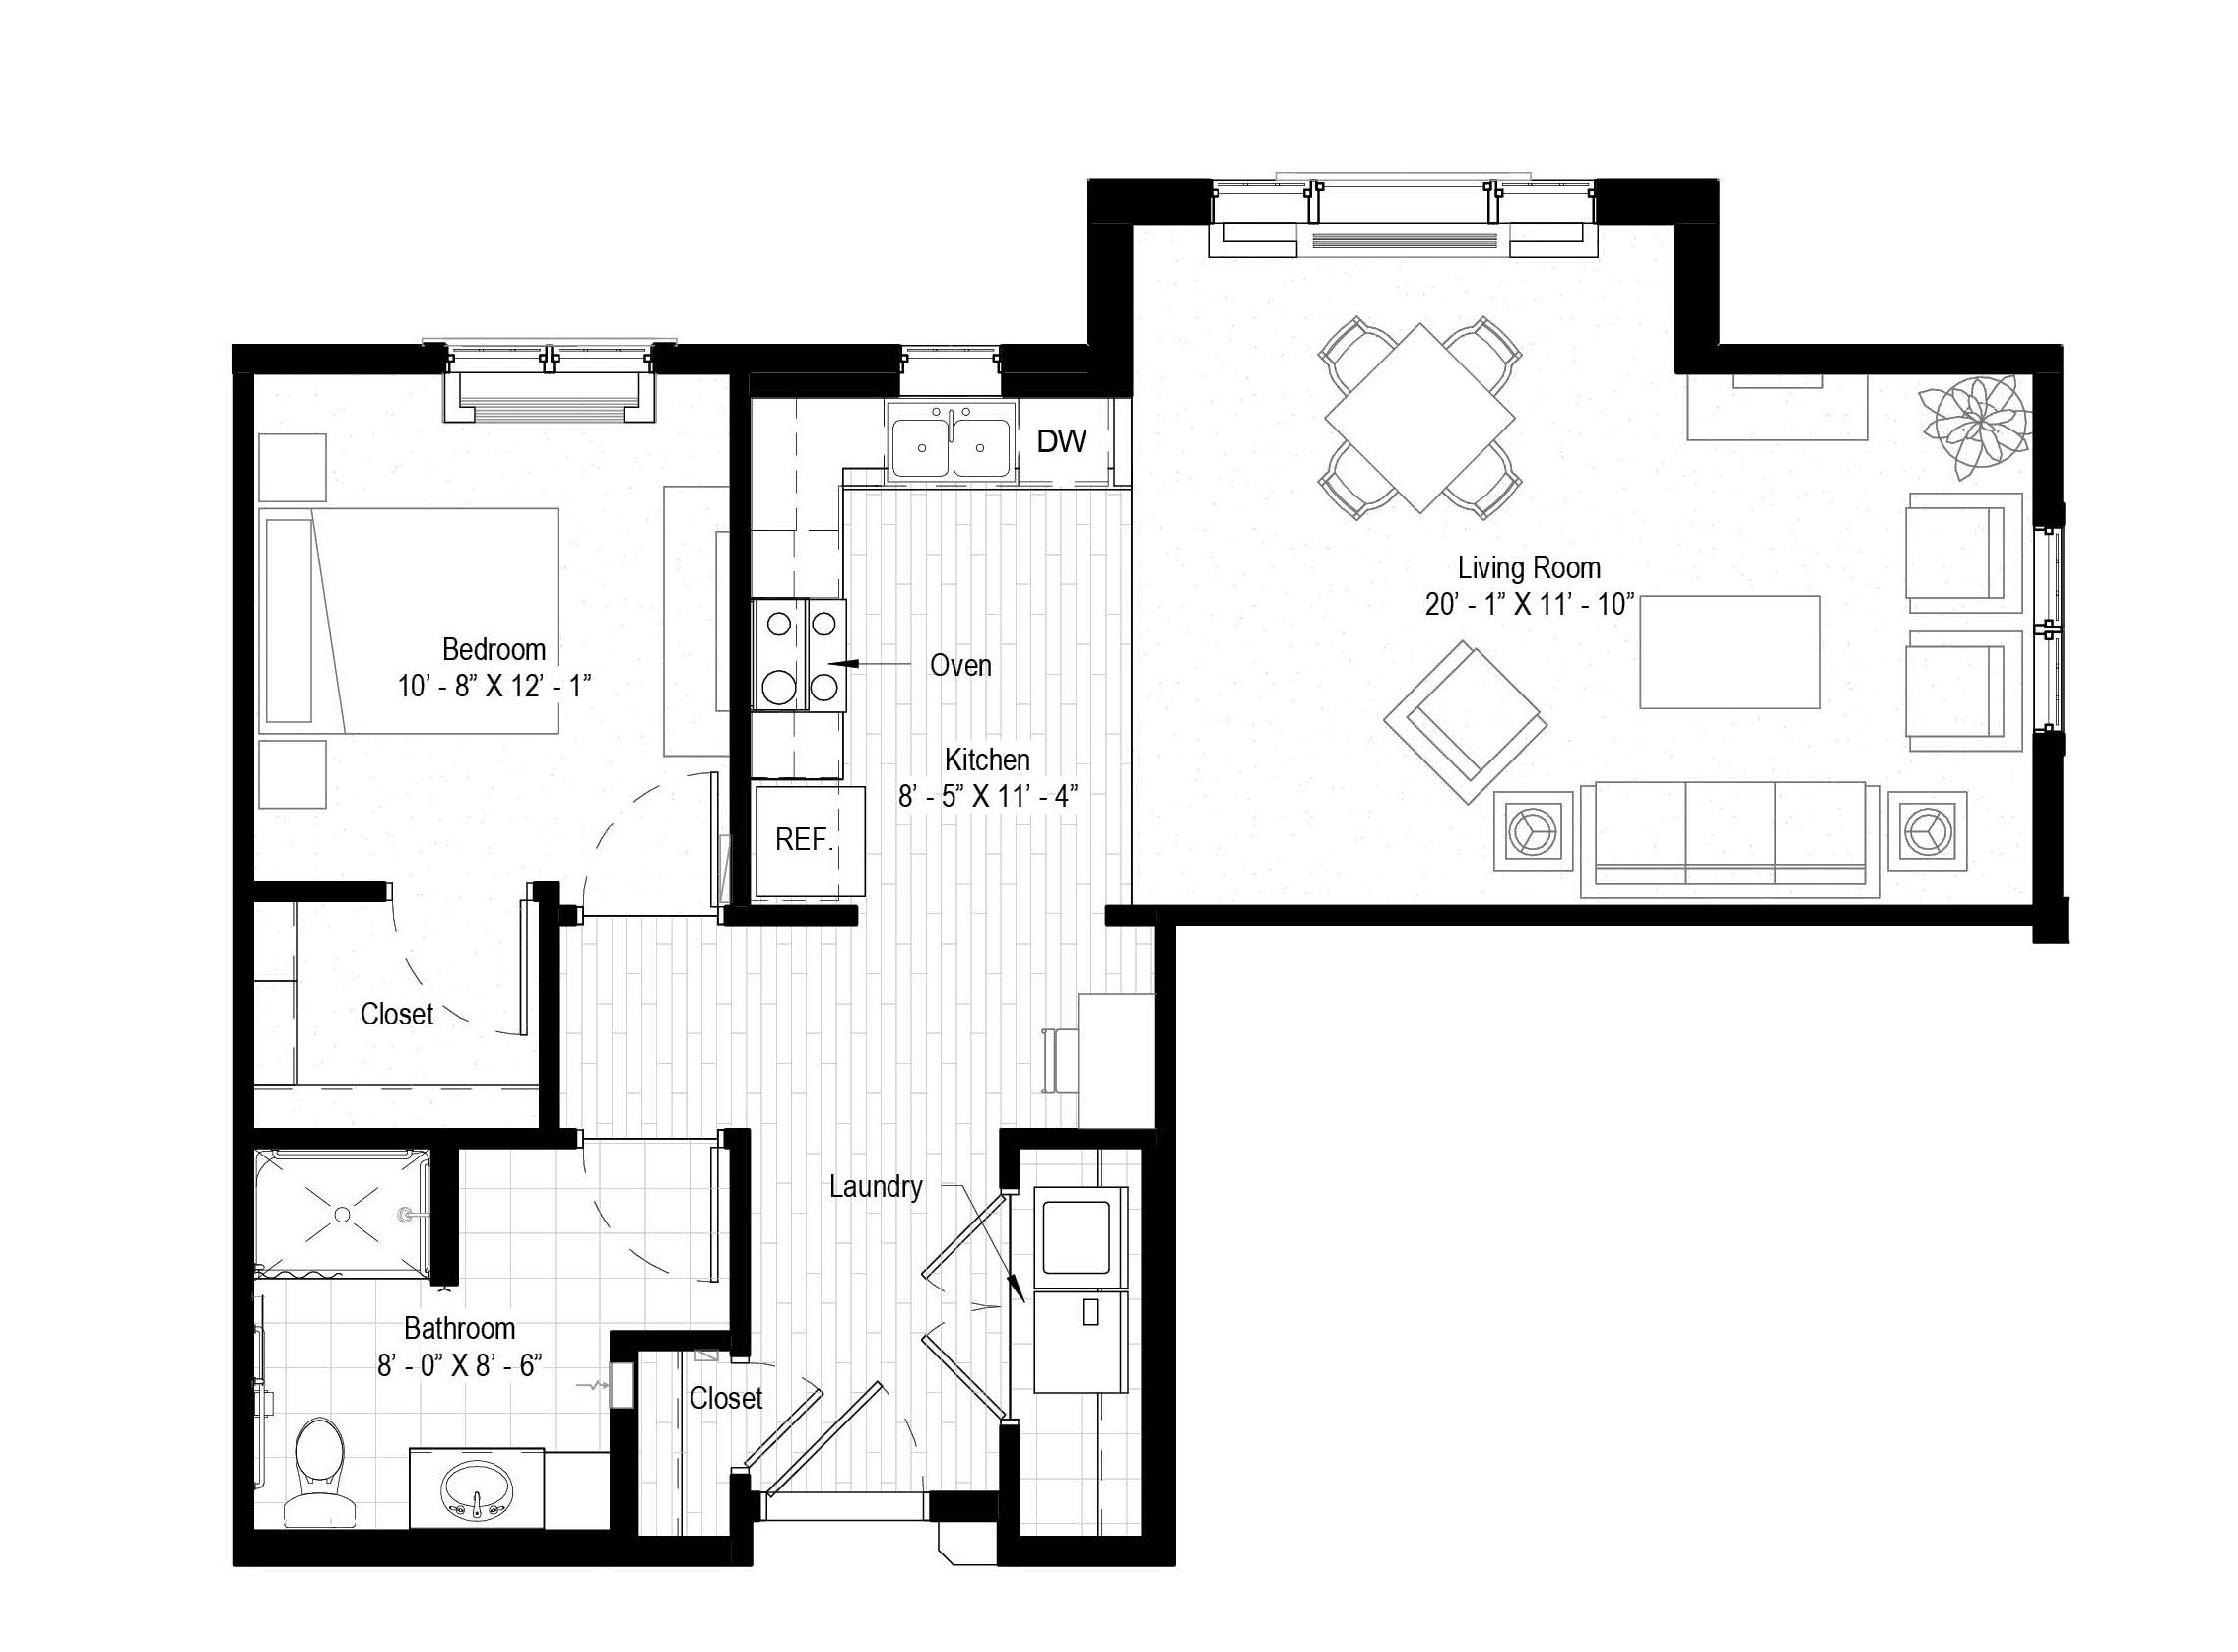 The Lund - 865 sq ft, 1 bedroom, 1 bathroom